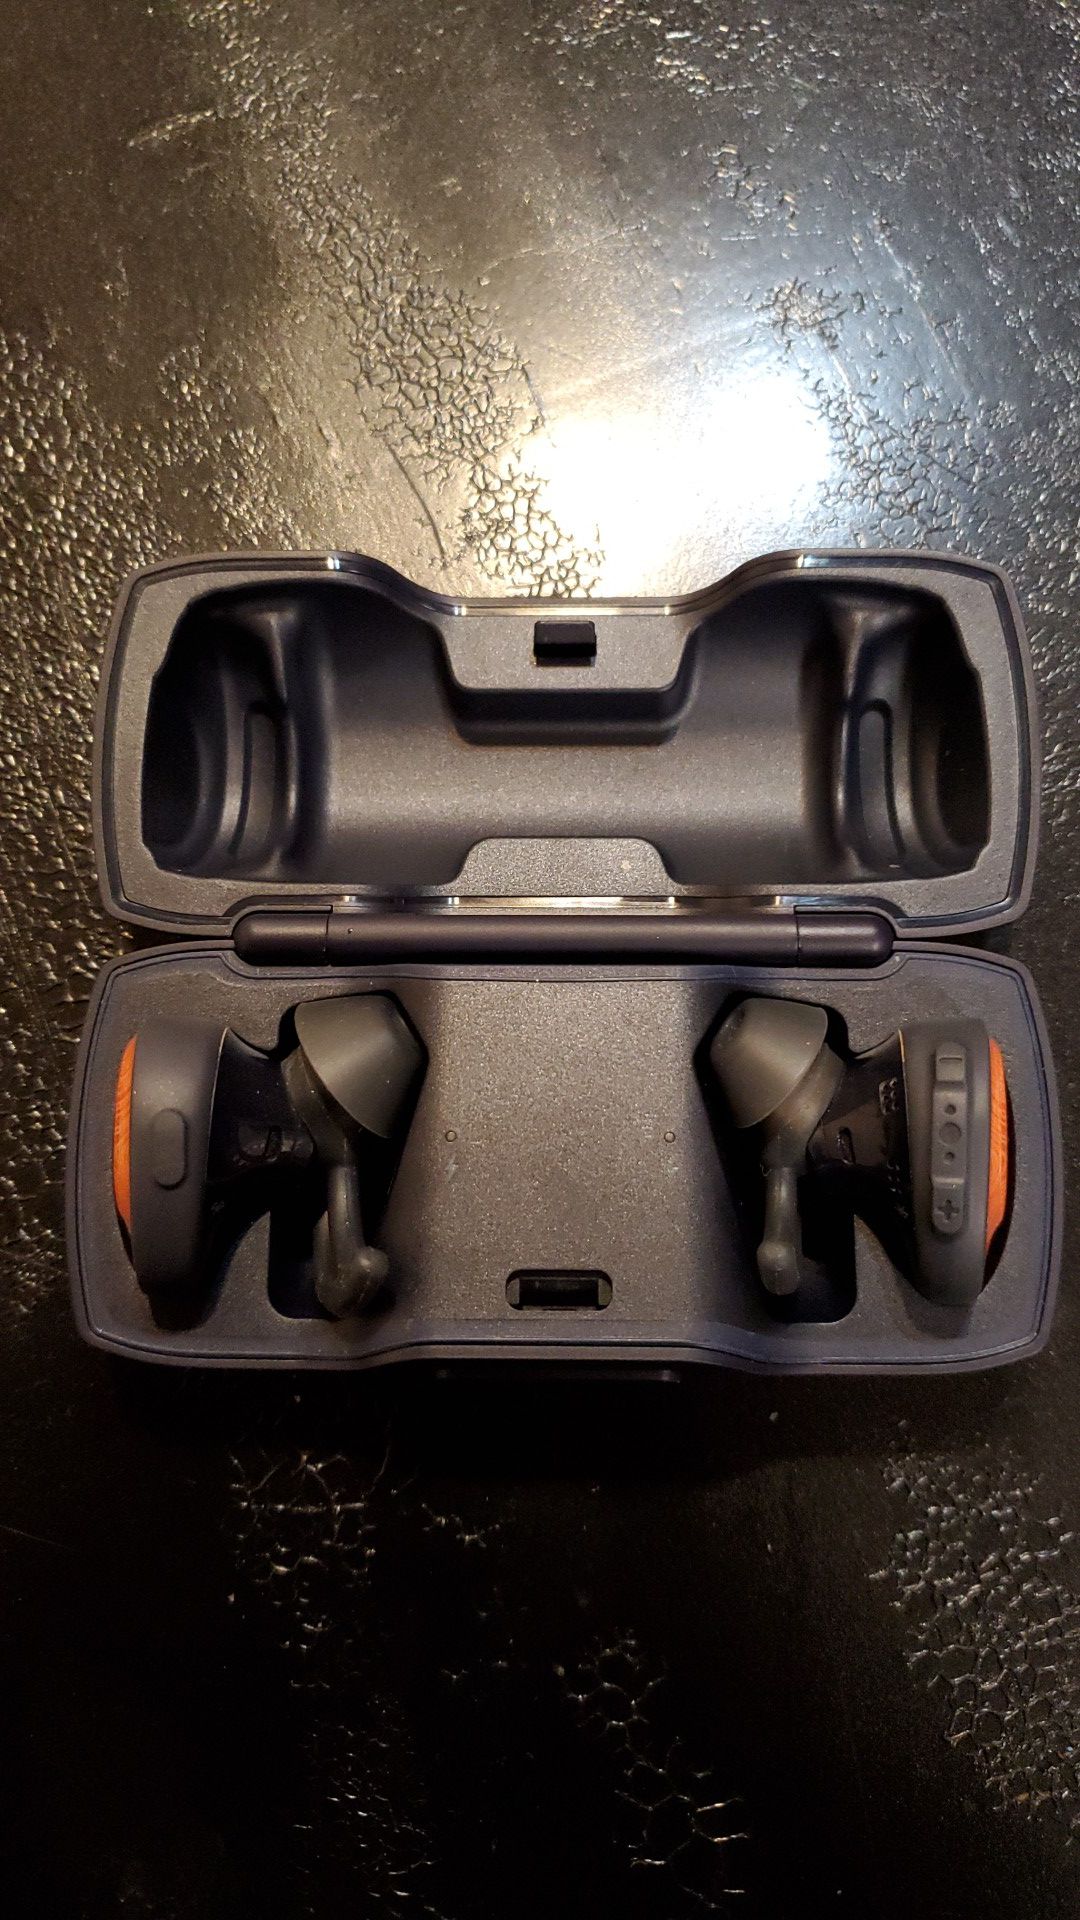 Michey hall, Bose brand bluetooth headphones, has only been used 3 times very good condition